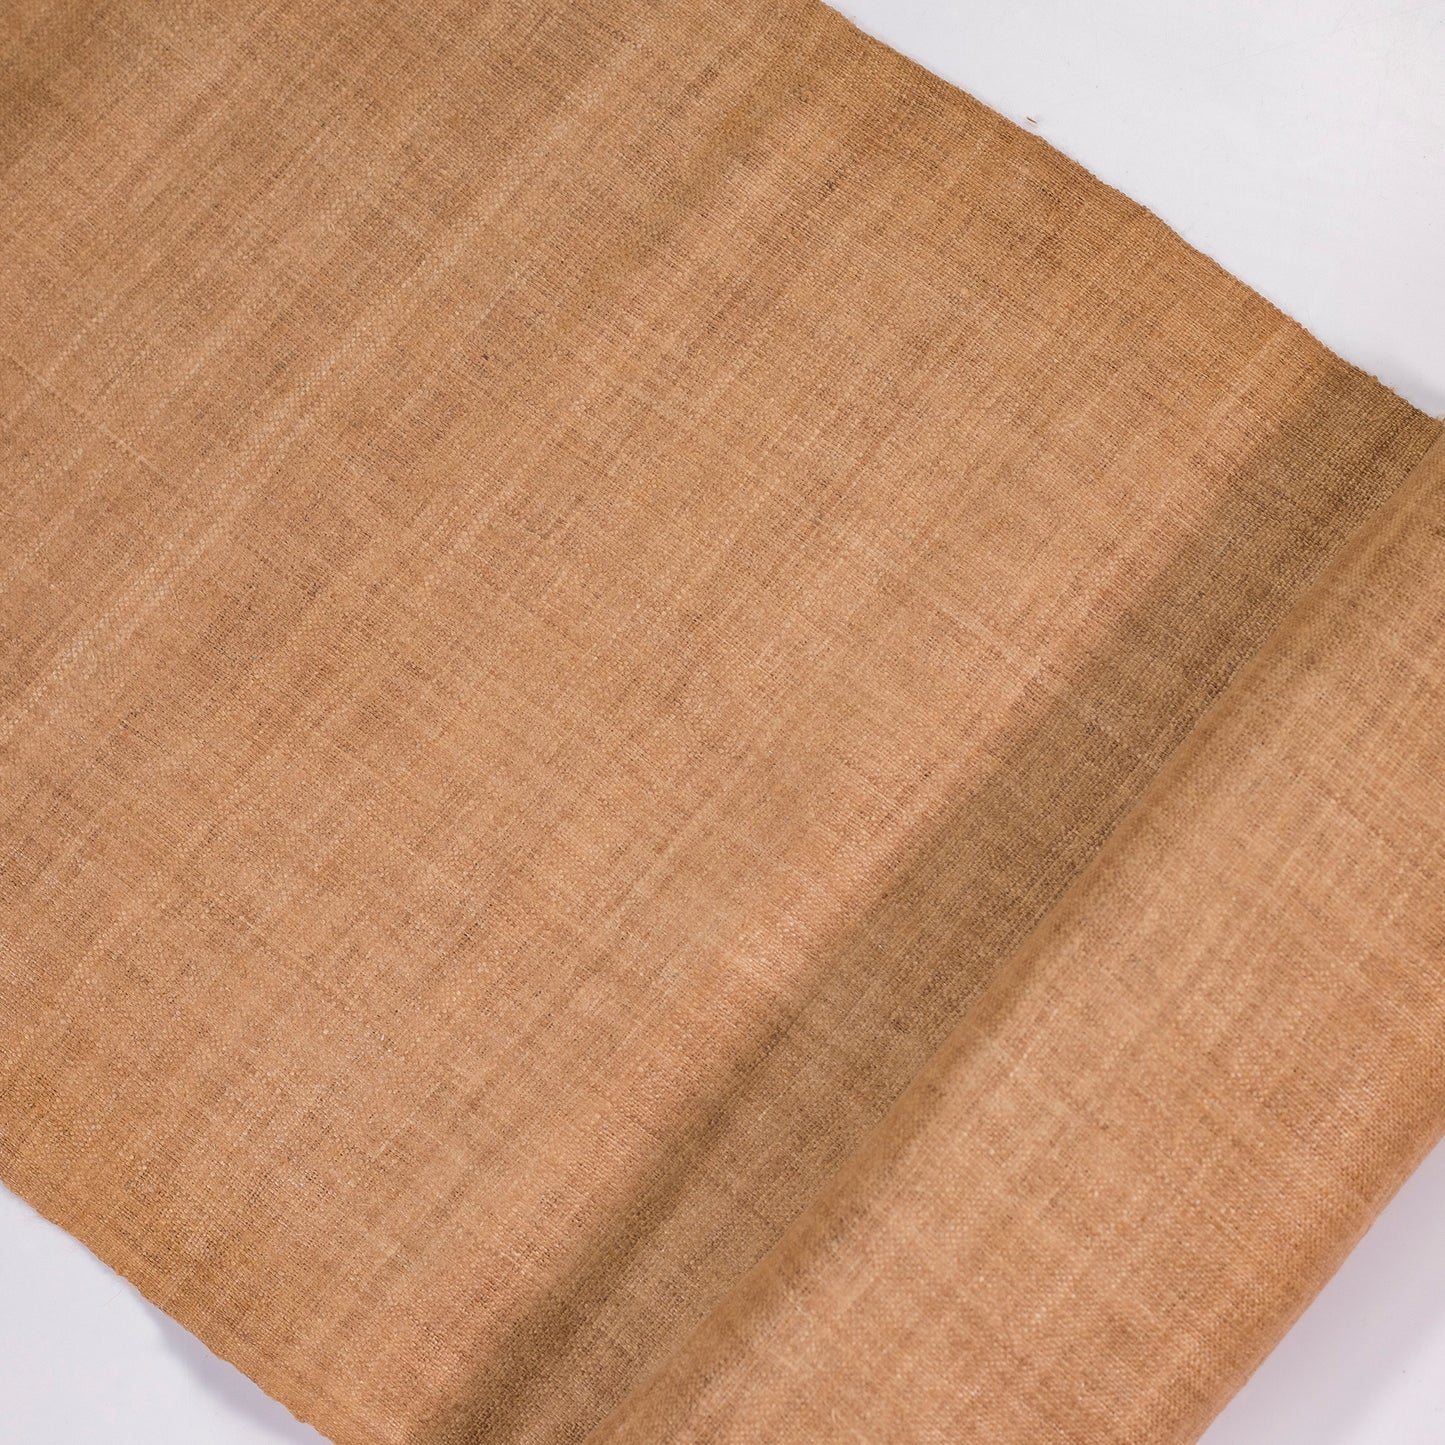 Raw hemp fabric, natural color in LIGHT SEPIA BROWN